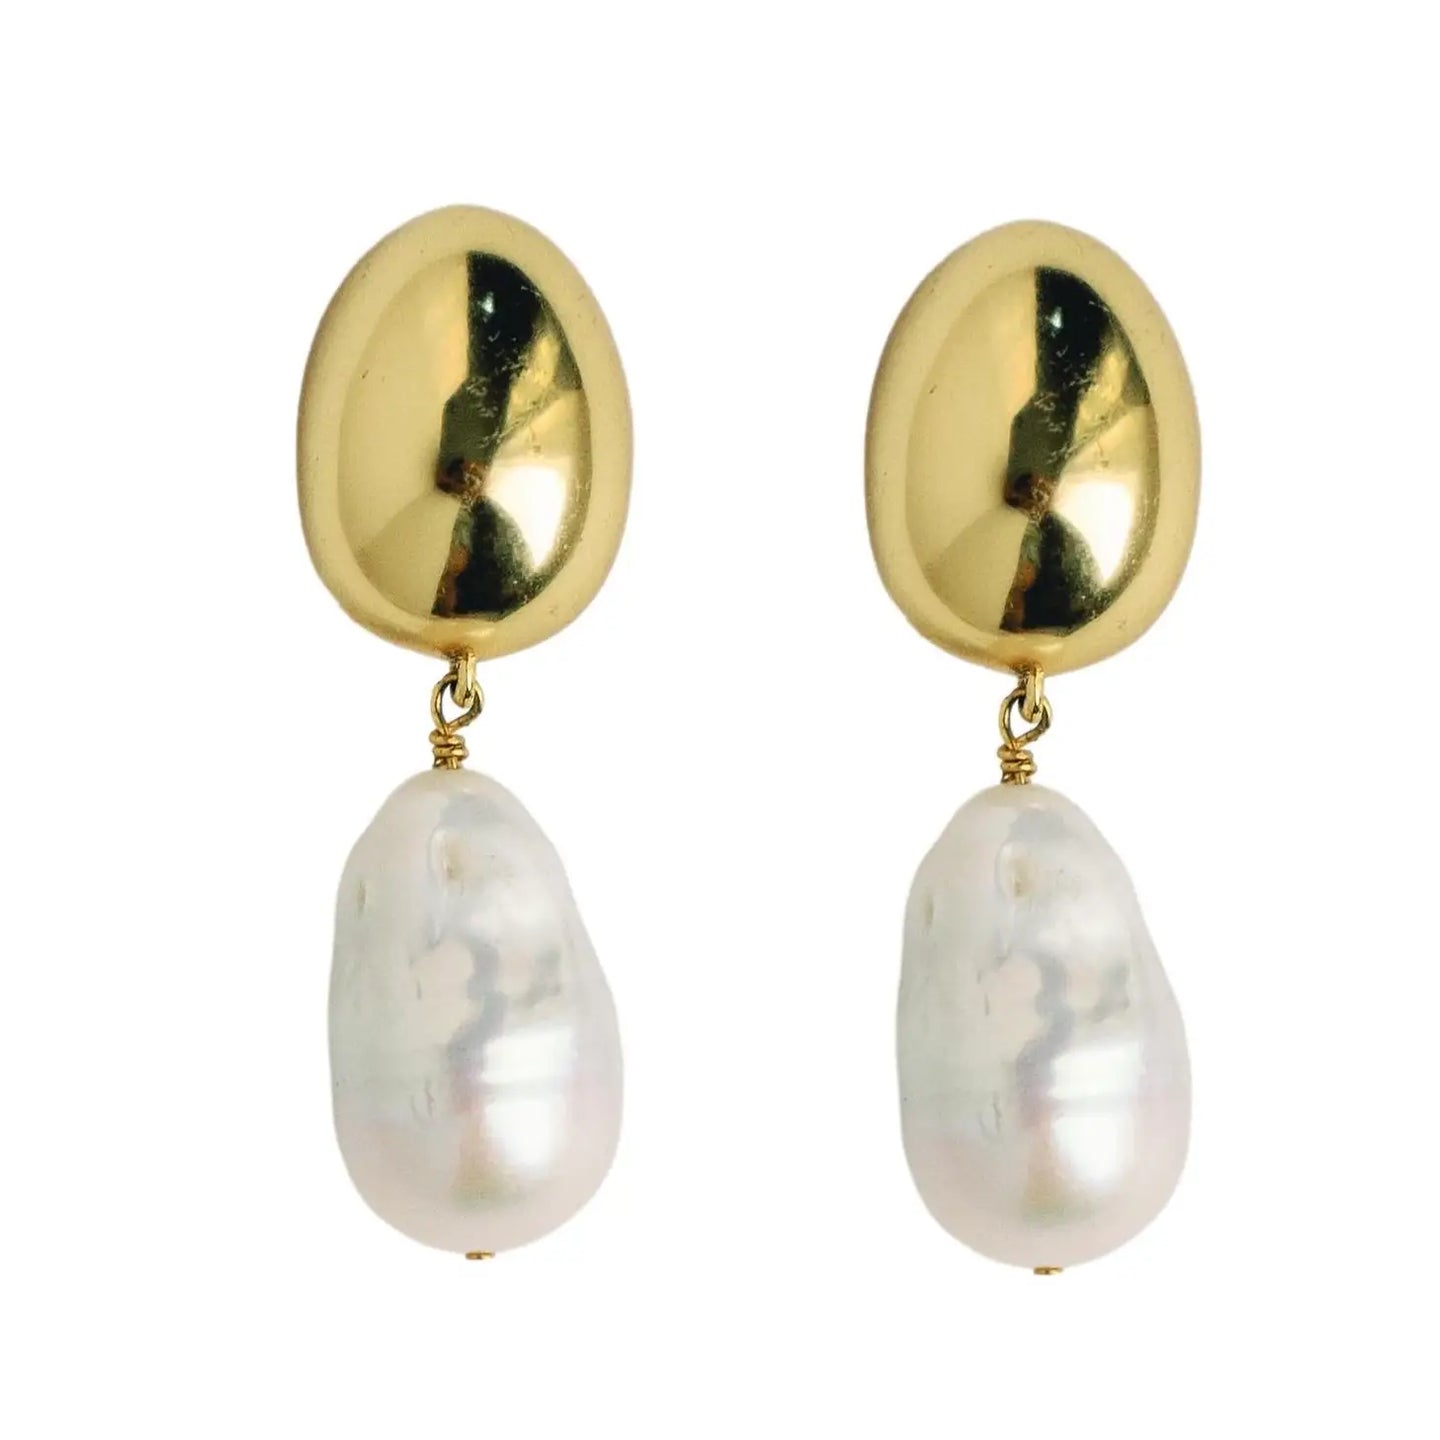 Vintage Chunky Gold and Pearl Statement Drop Earrings - Gold Multi